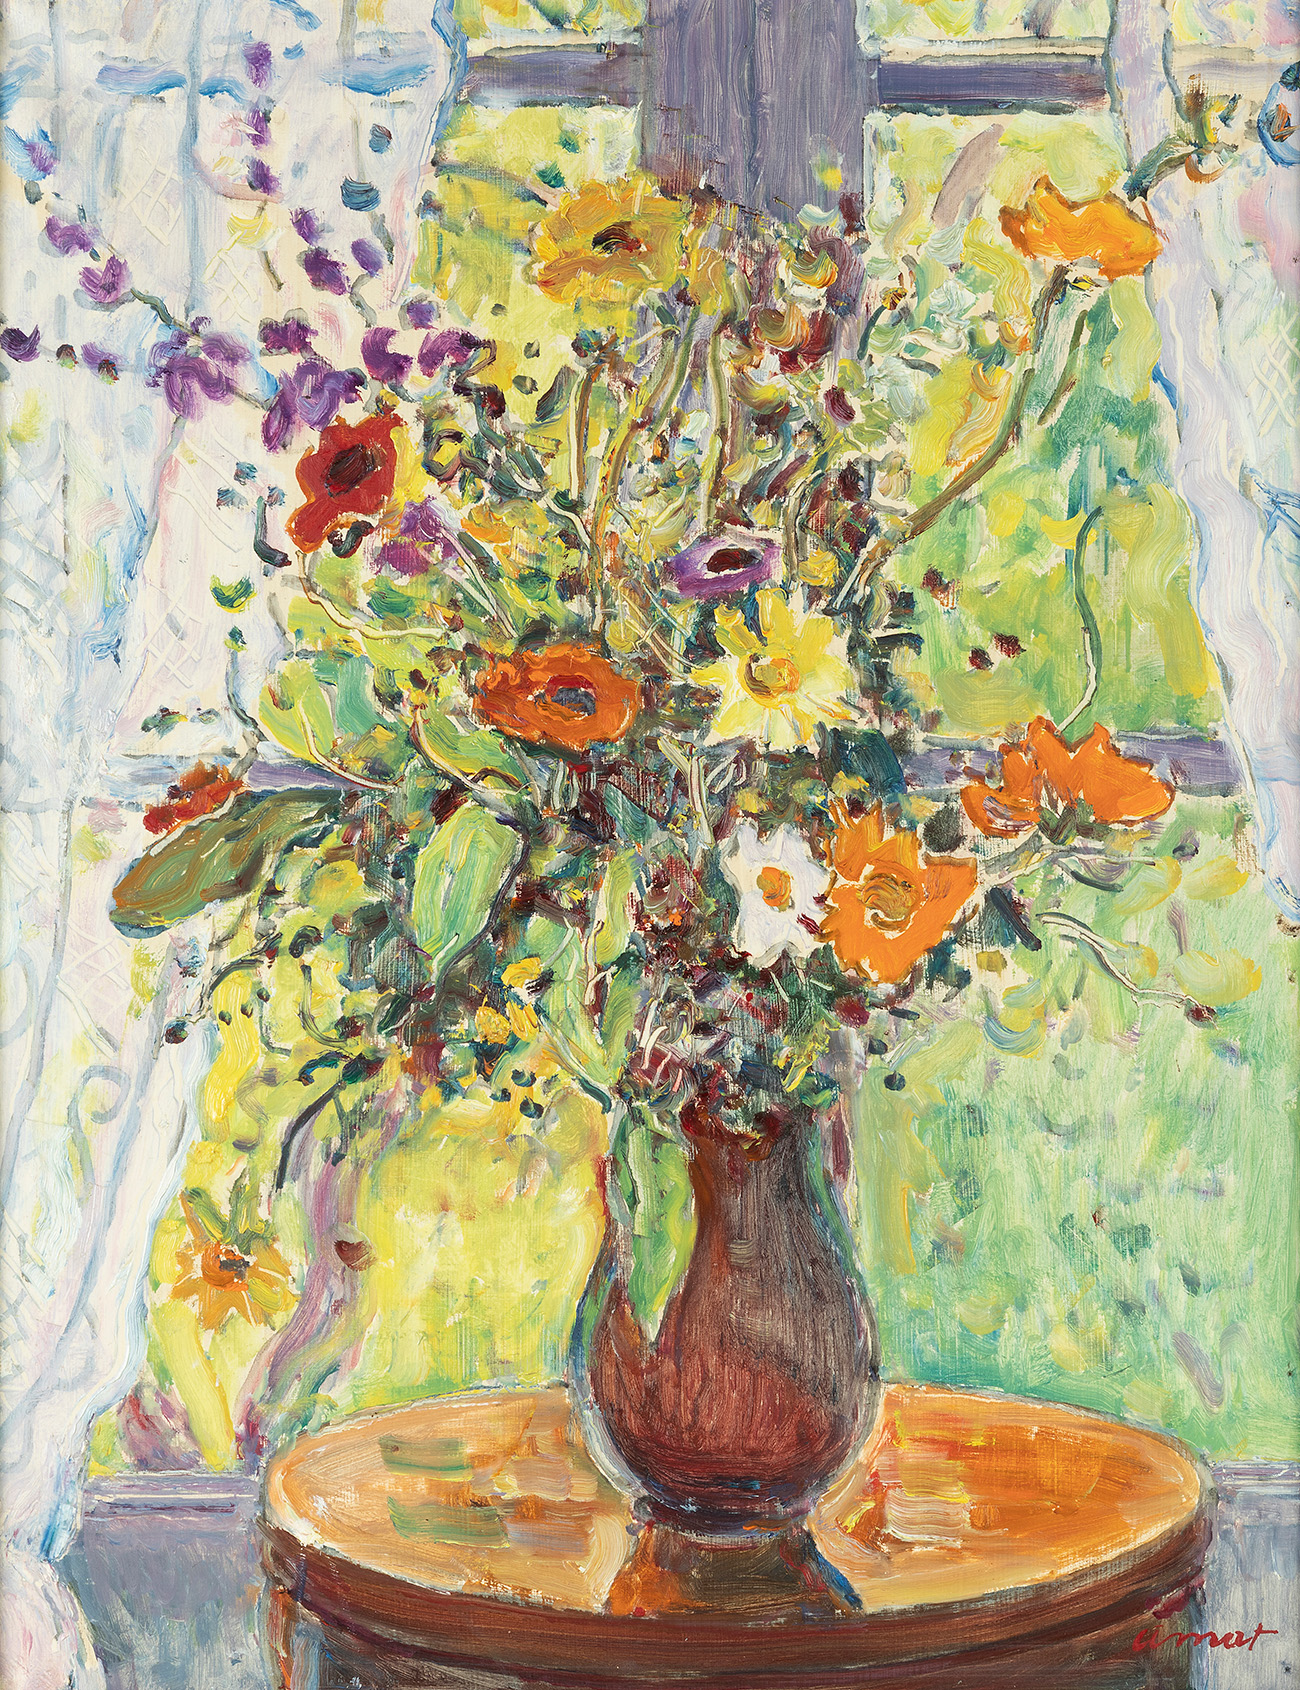 JOSEP AMAT PAGÈS (Barcelona, 1901 - 1991)."Flors, gerro fosc".Oil on canvas.Signed in the lower